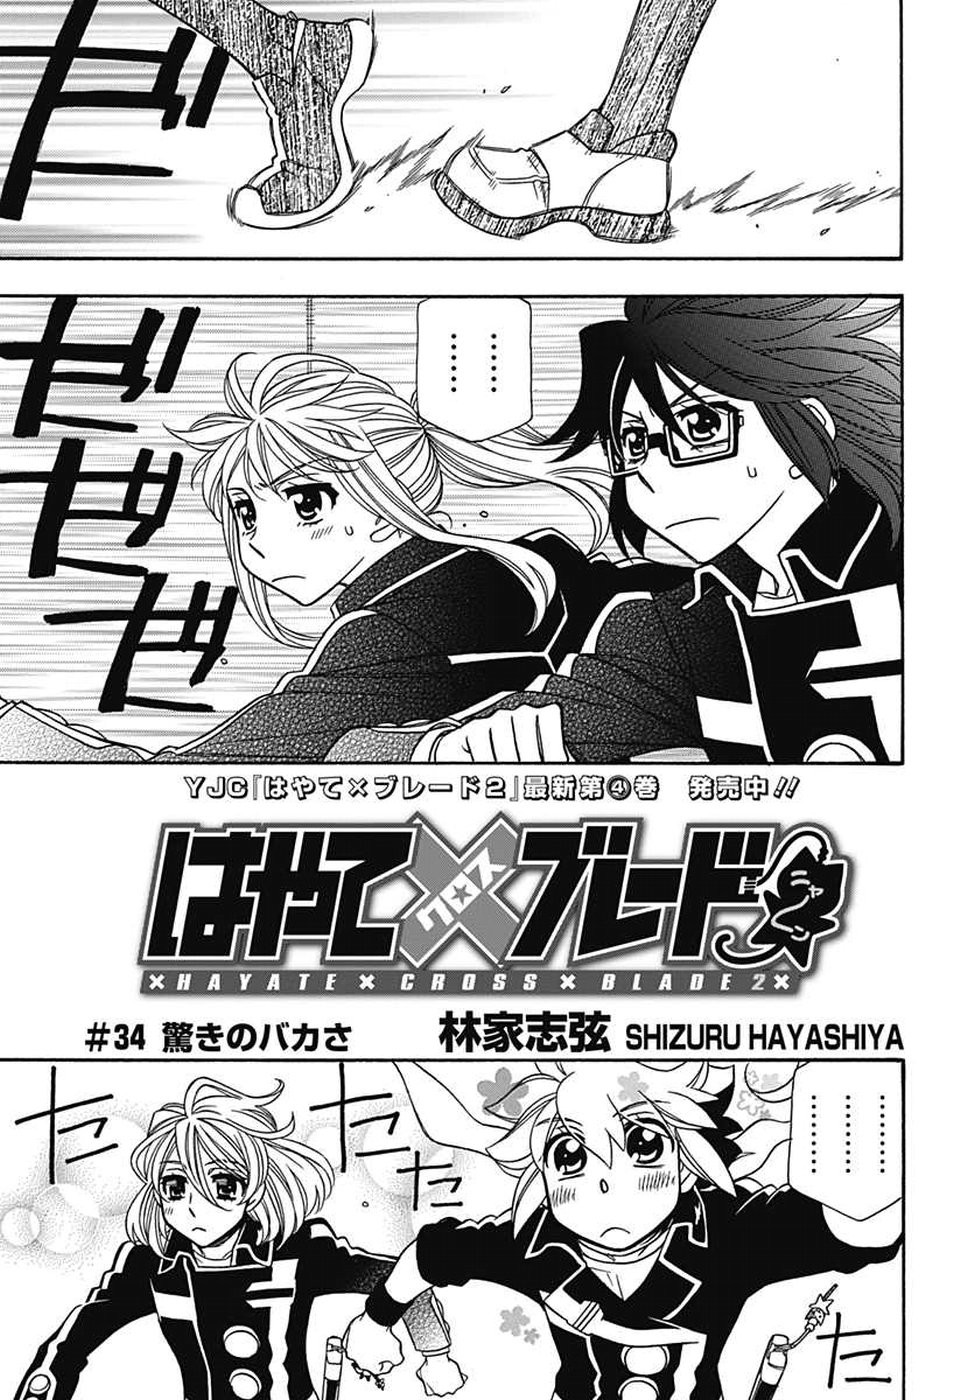 Hayate x Blade 2 - Chapter 034 - Page 1